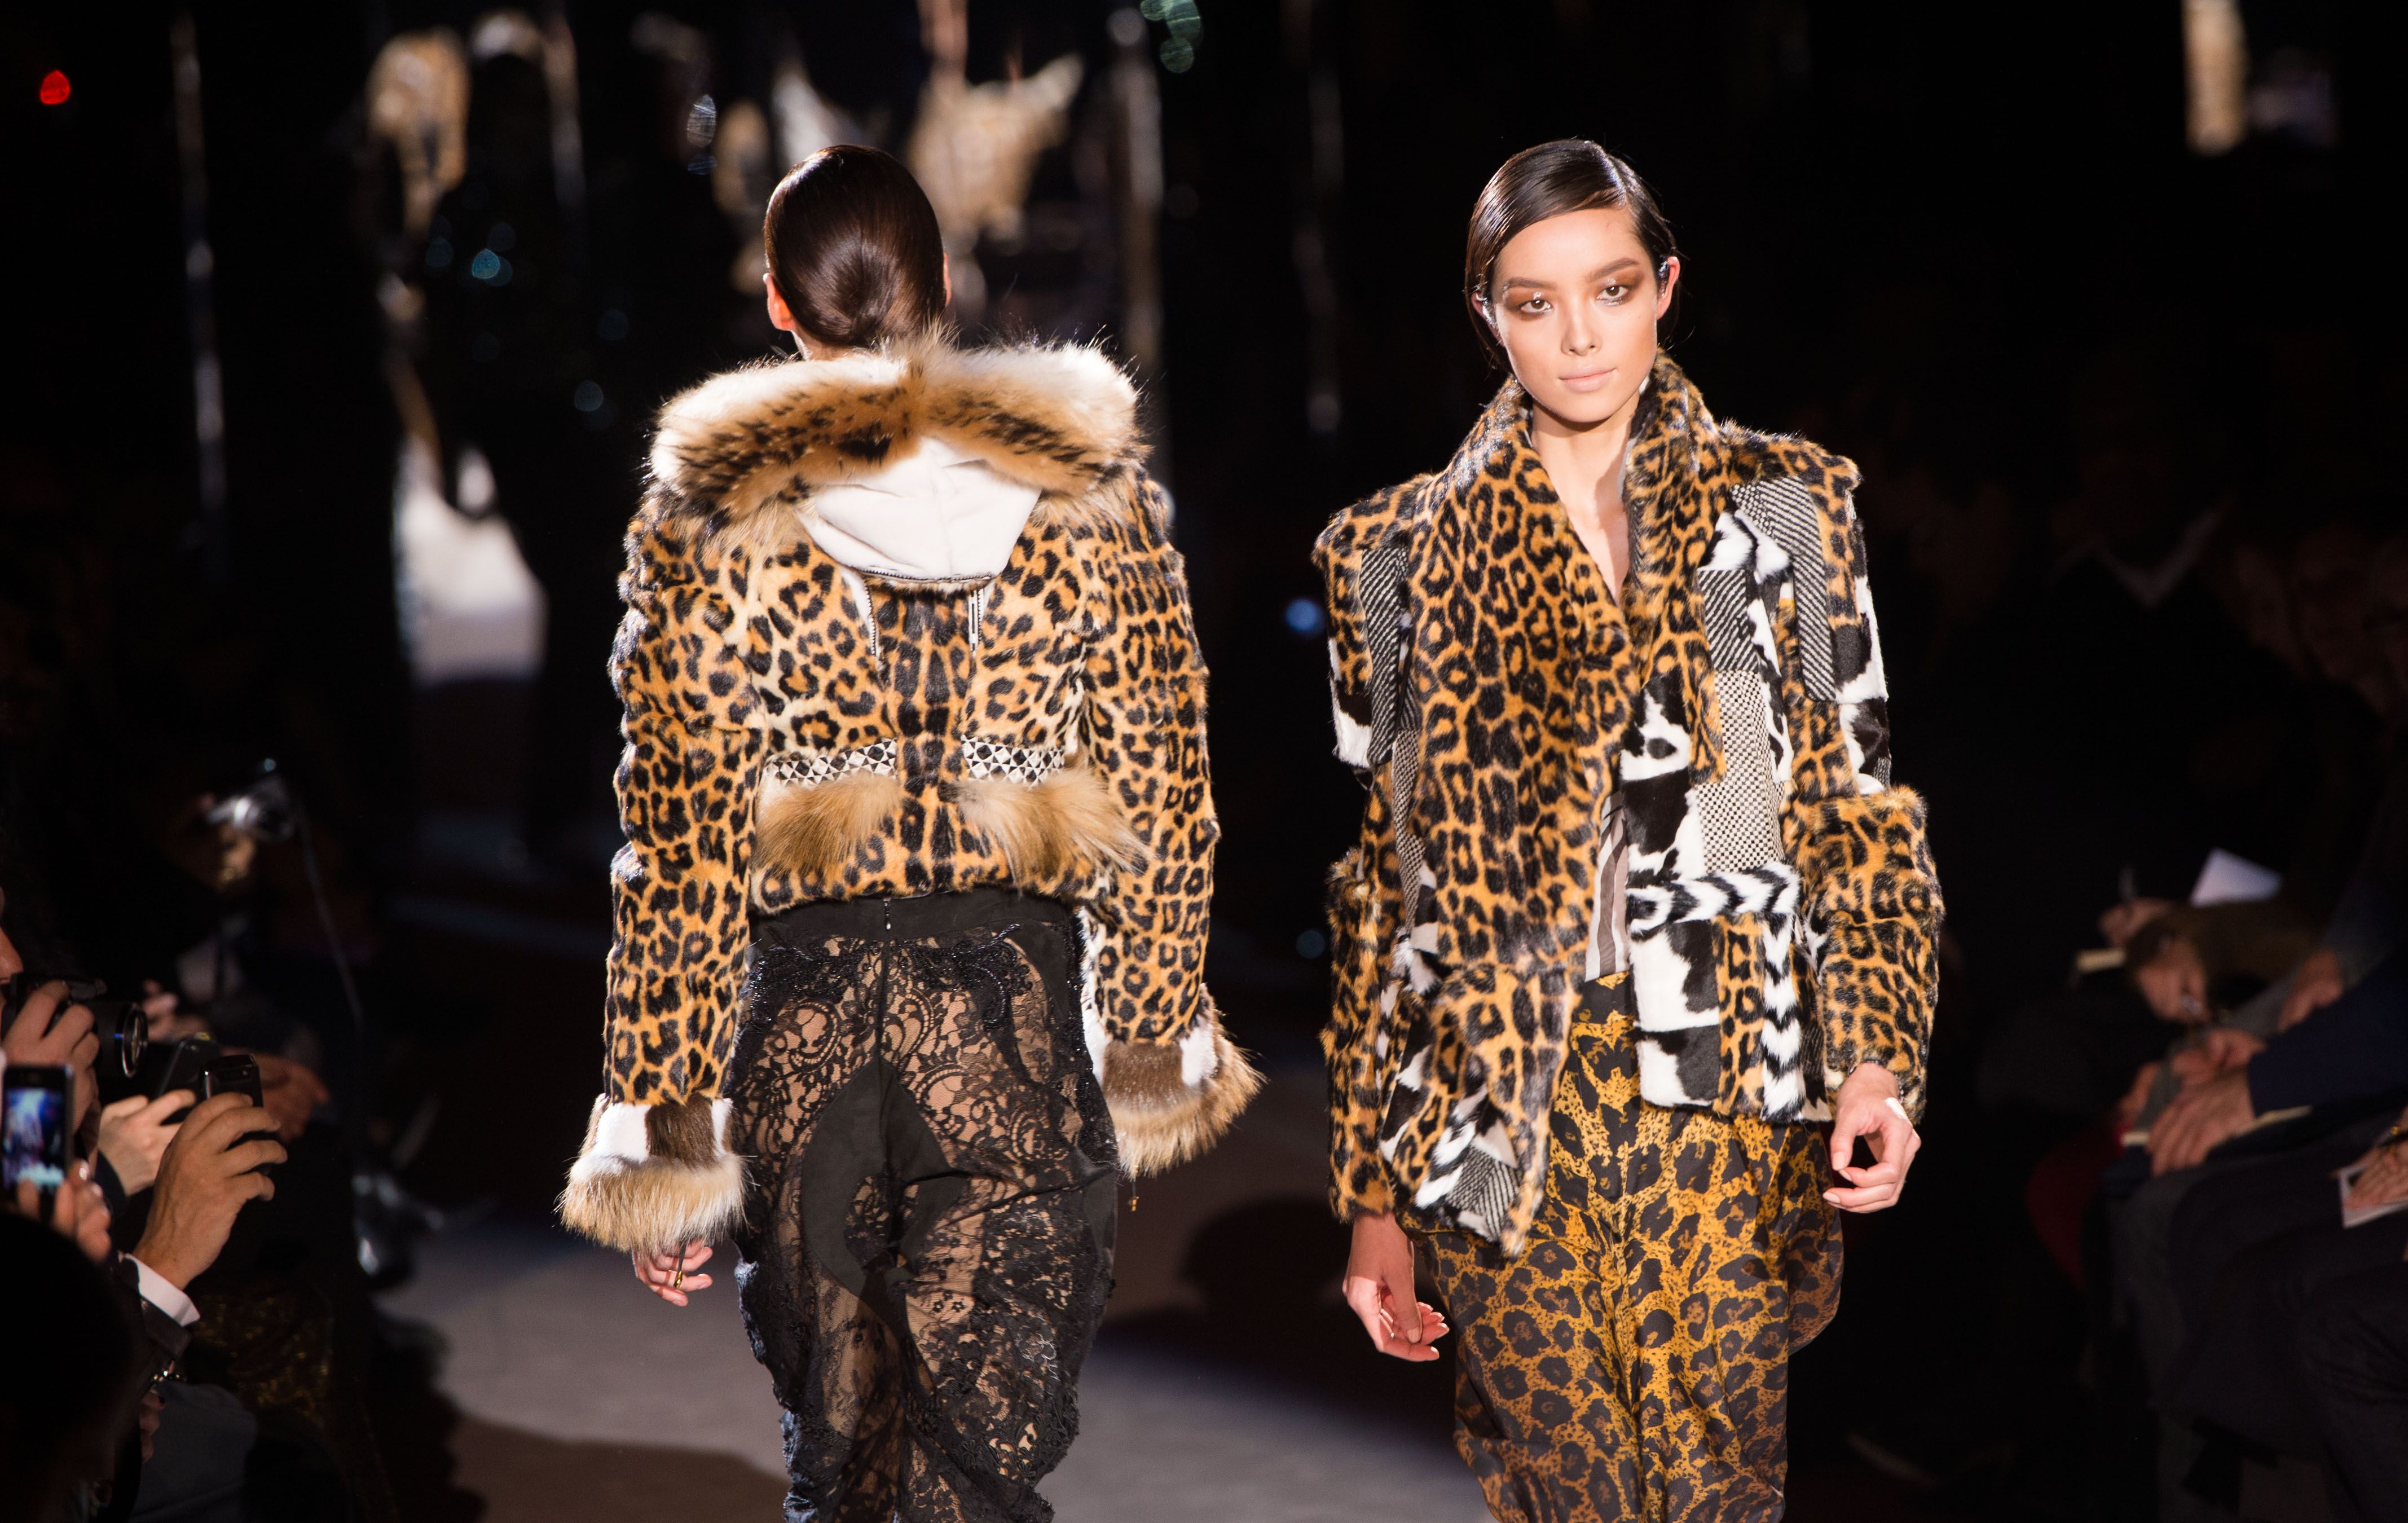 The Best Leopard Looks - The History of Leopard Print Prints on Runways